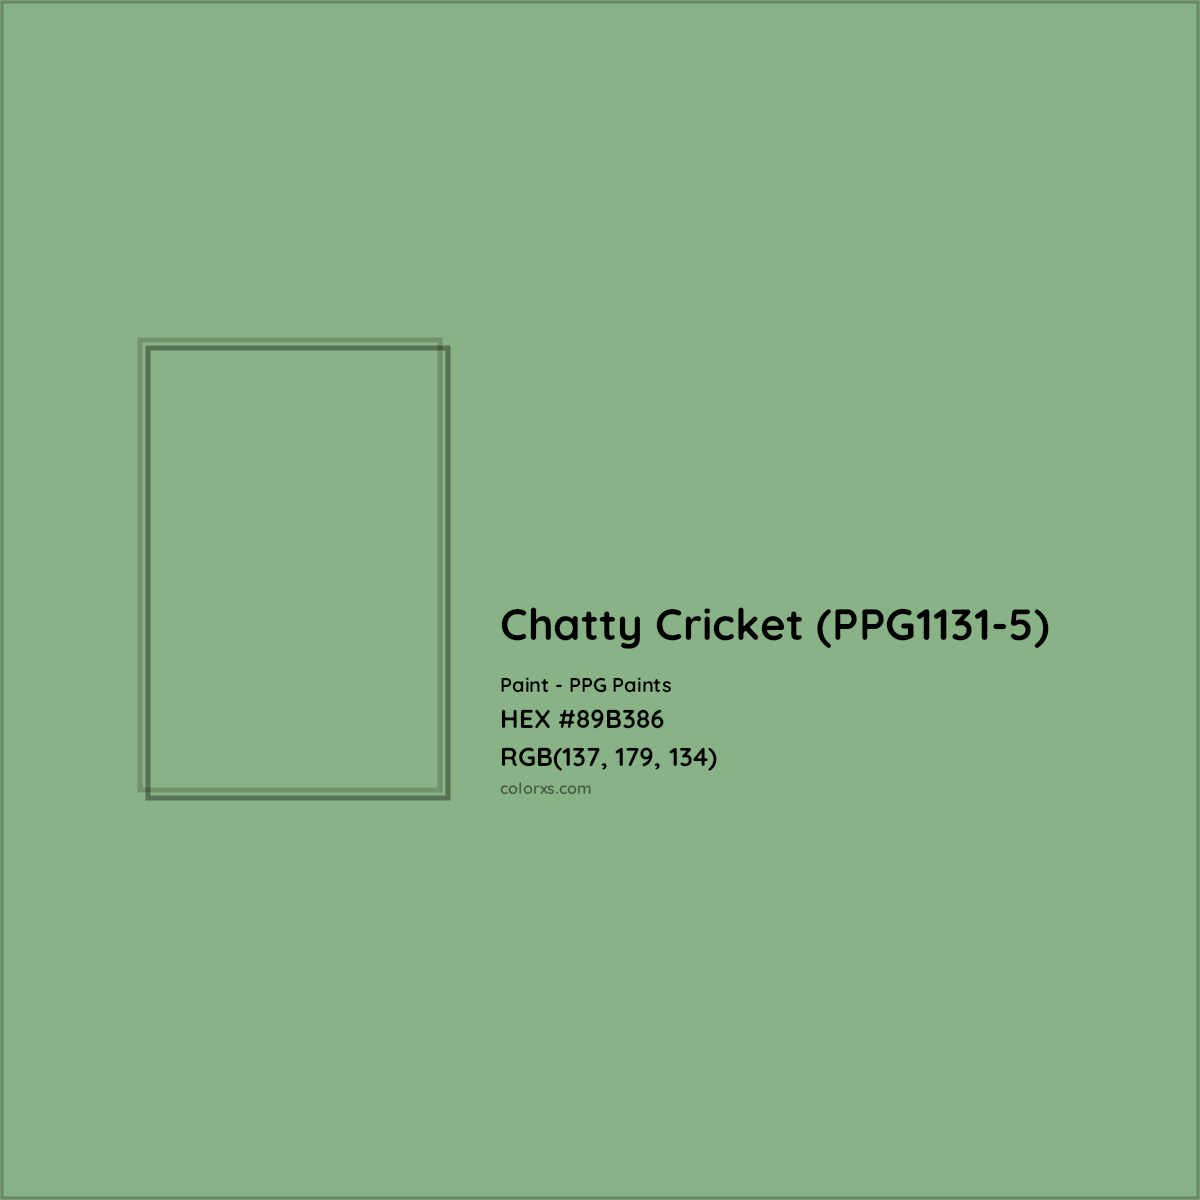 HEX #89B386 Chatty Cricket (PPG1131-5) Paint PPG Paints - Color Code